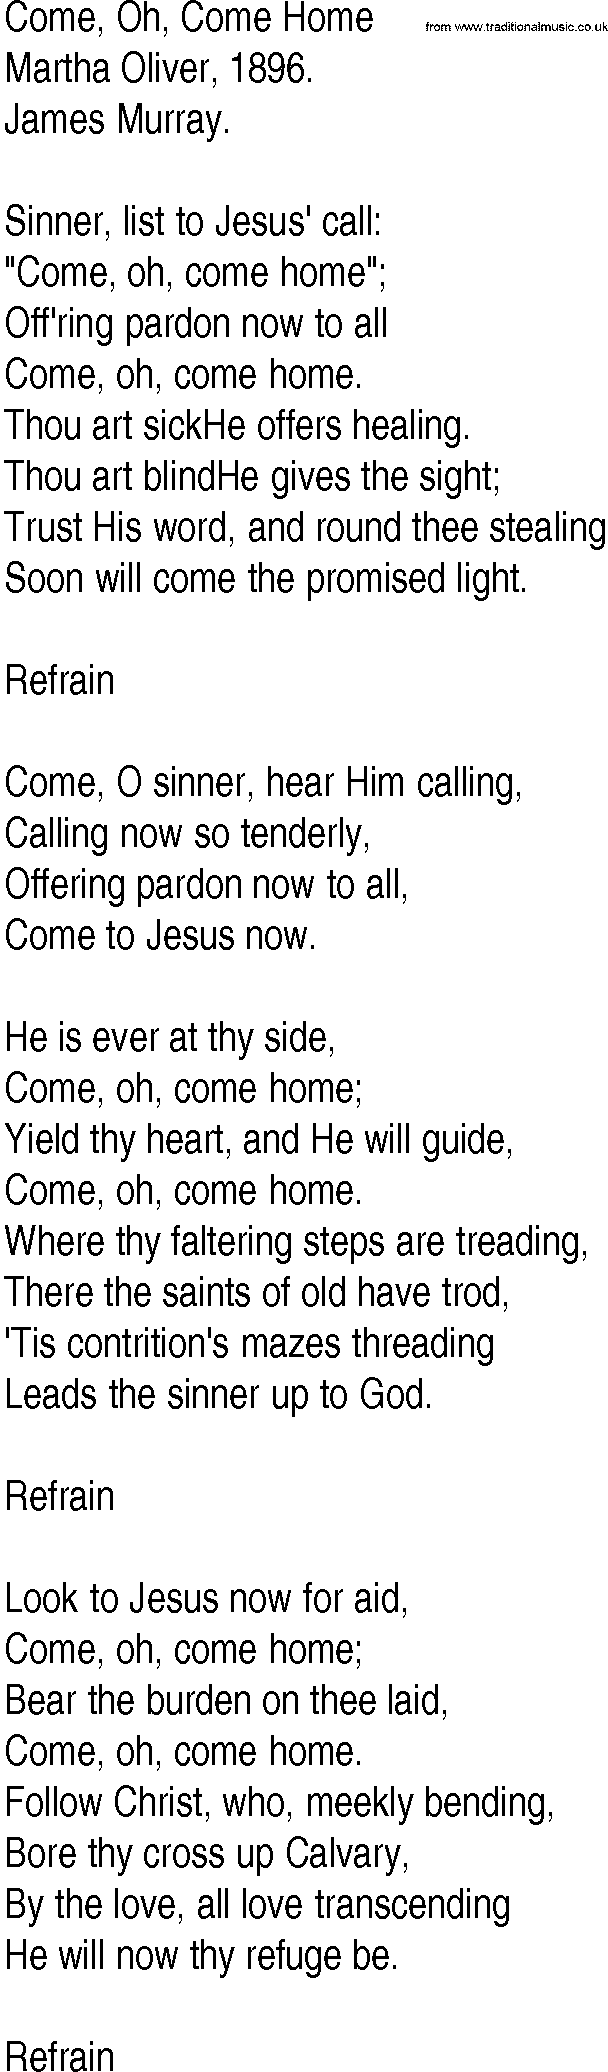 Hymn and Gospel Song: Come, Oh, Come Home by Martha Oliver lyrics